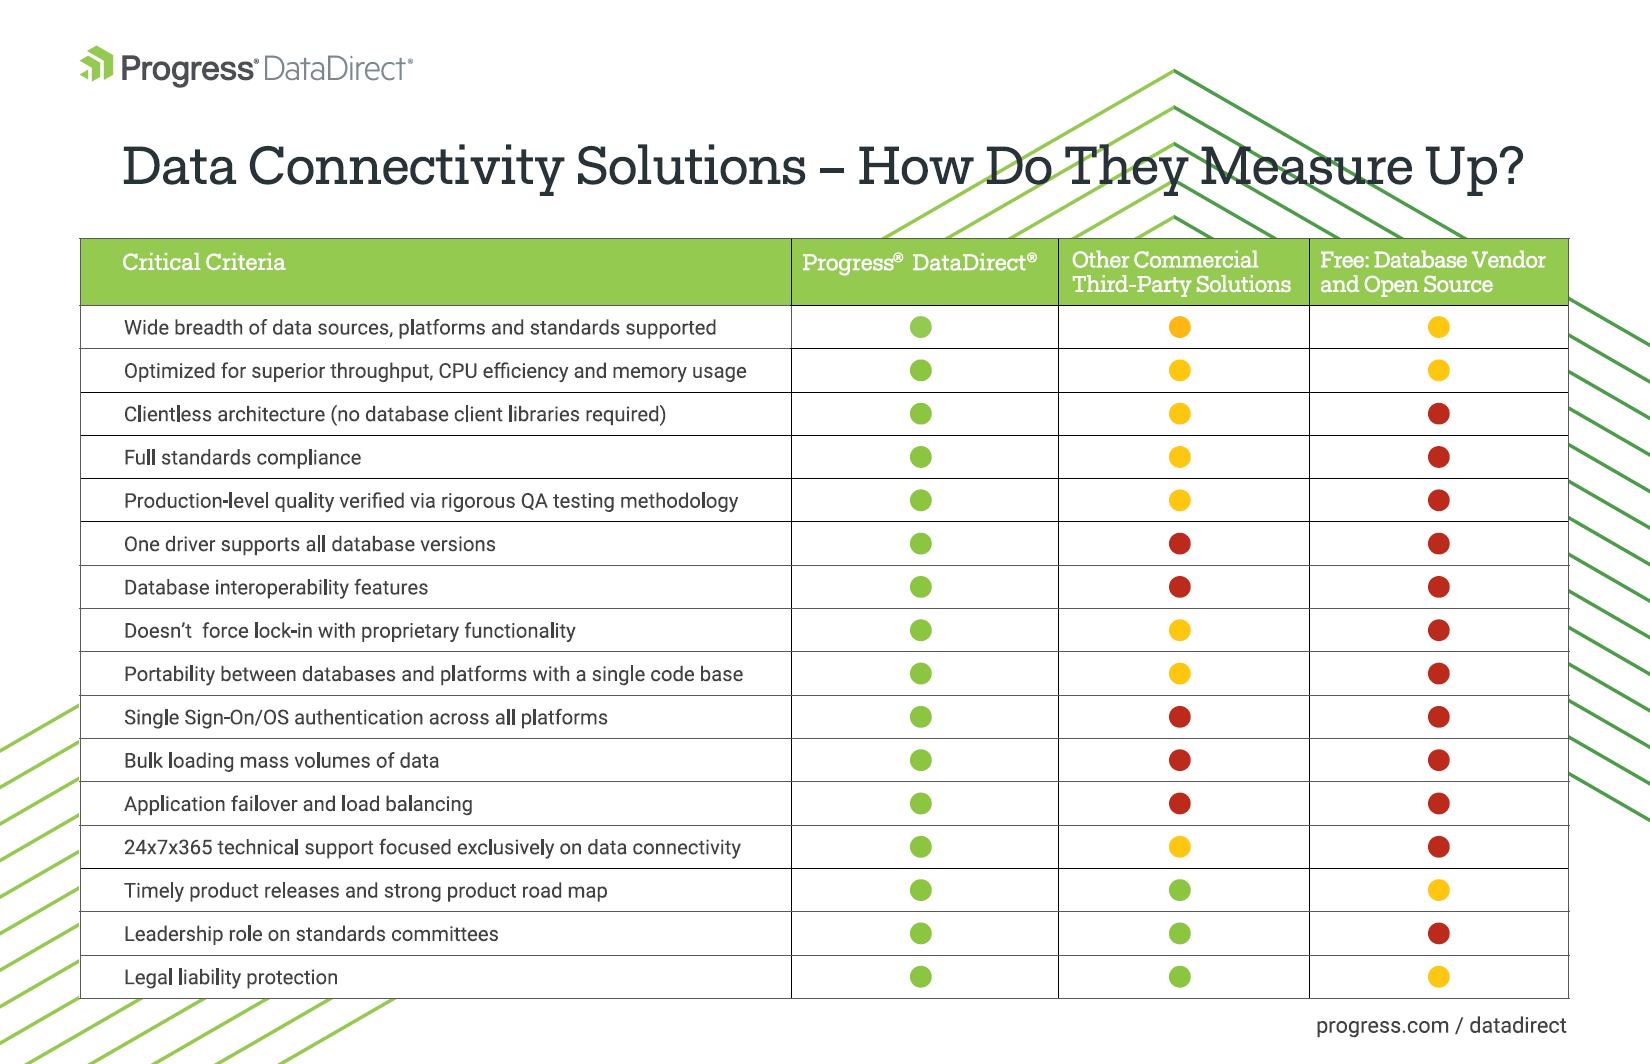 data-connectivity-solutions--how-do-they-measure-up029e0b65c57a45e5995b6ad3bcb58f37.png